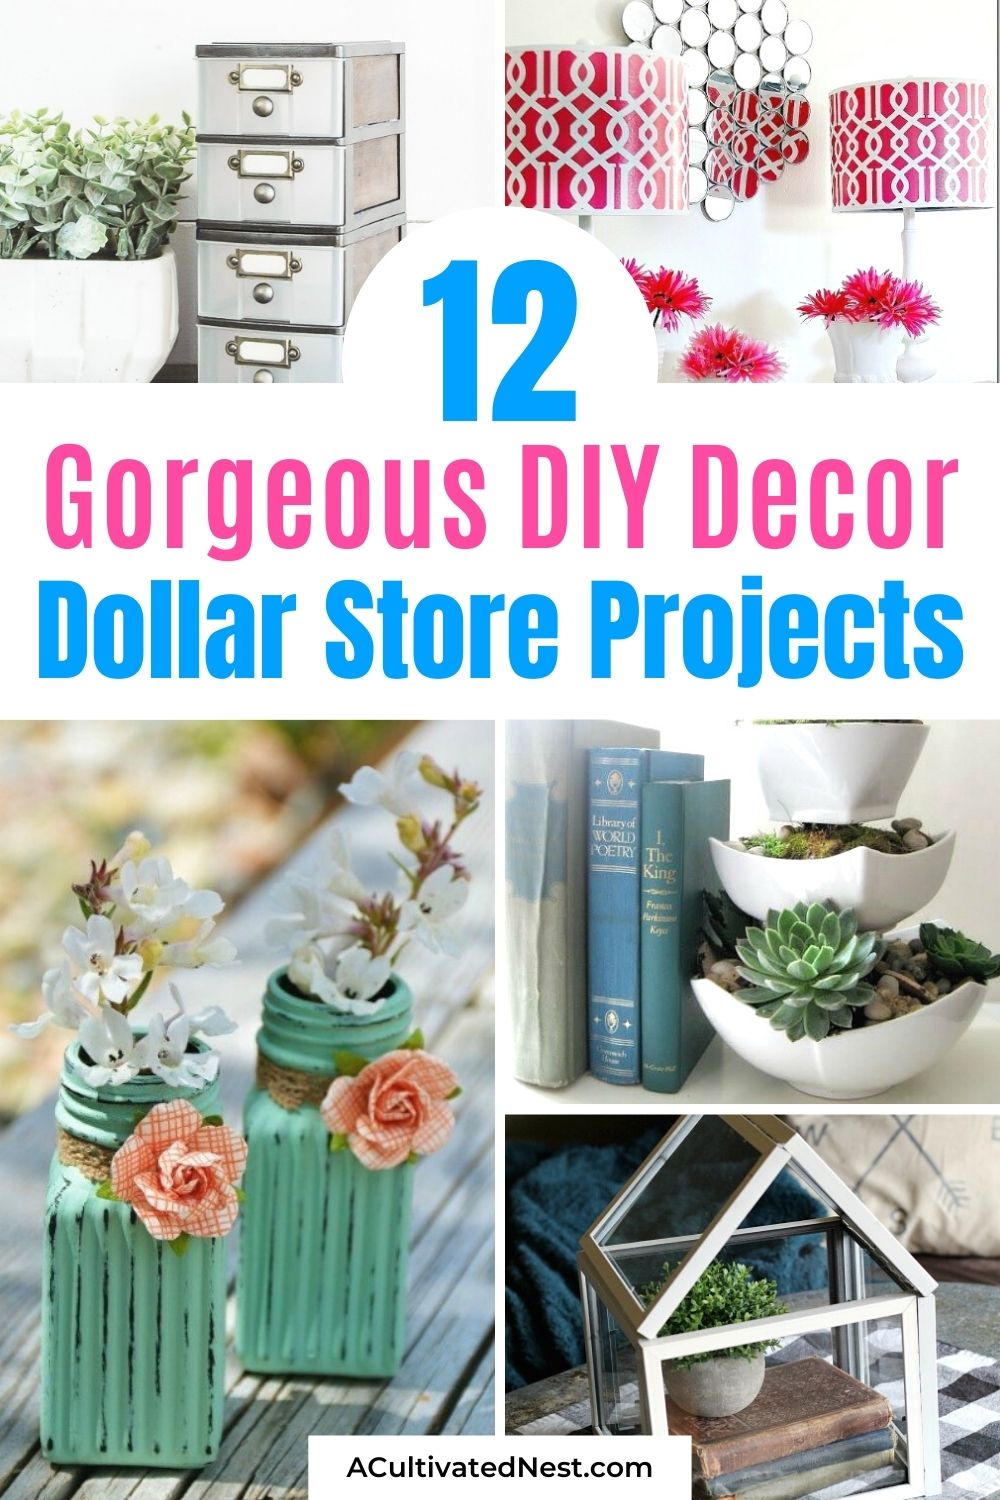 12 DIY Dollar Store Home Decorating Projects- Decorating on a budget doesn't have to be boring. Add some color and style to your home for little cost with these beautiful DIY dollar store décor projects! | DIY home decorating ideas, decorating on a budget #decorDIYs #dollarStoreDIY #dollarStoreDecor #DIY #ACultivatedNest